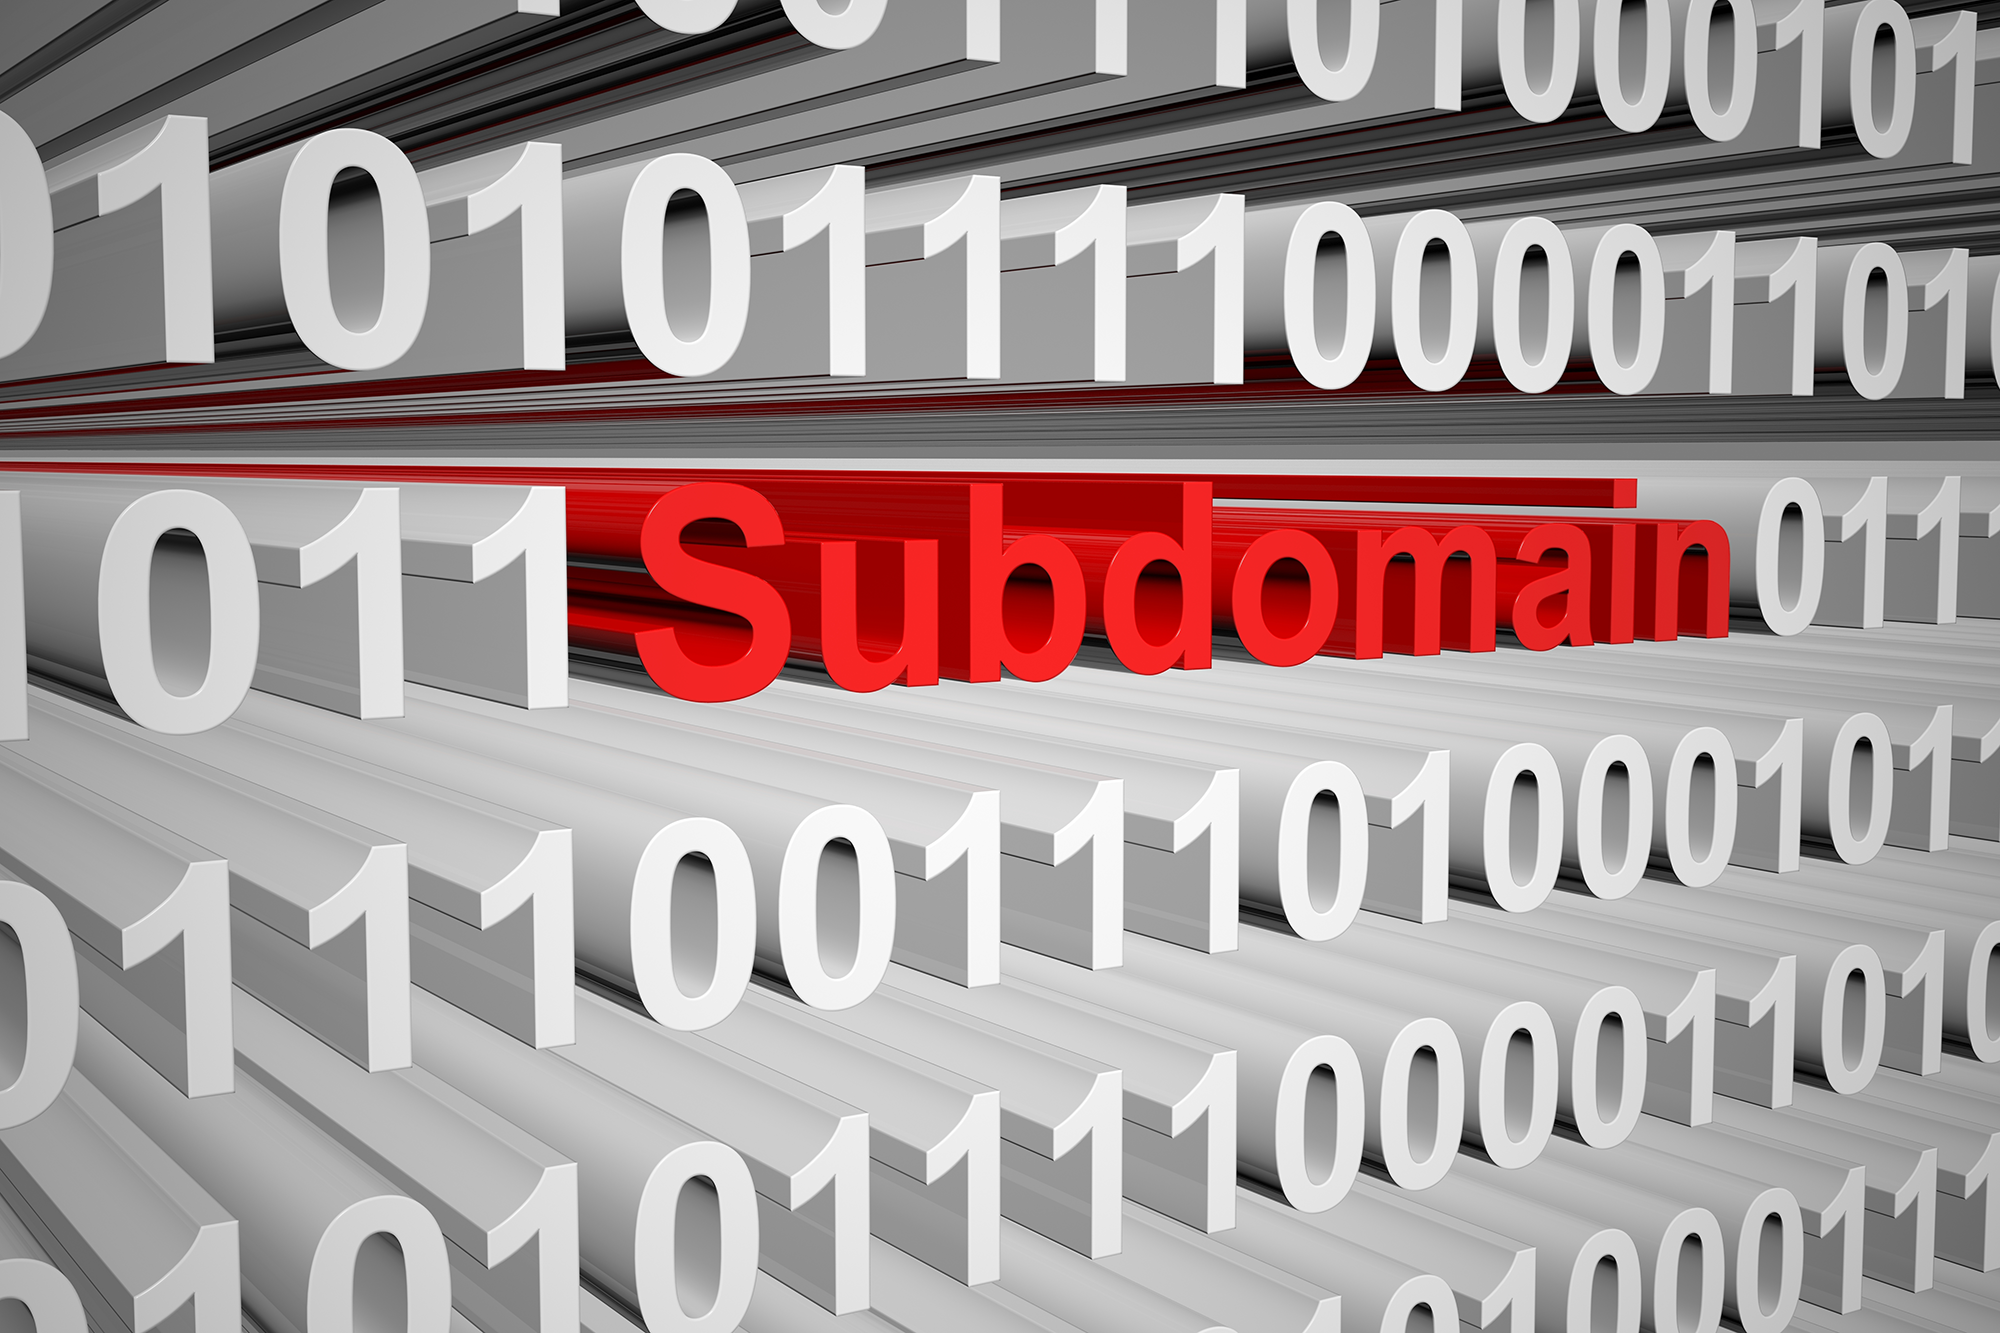 A comprehensive synopsis of 217 subdomain takeover reports